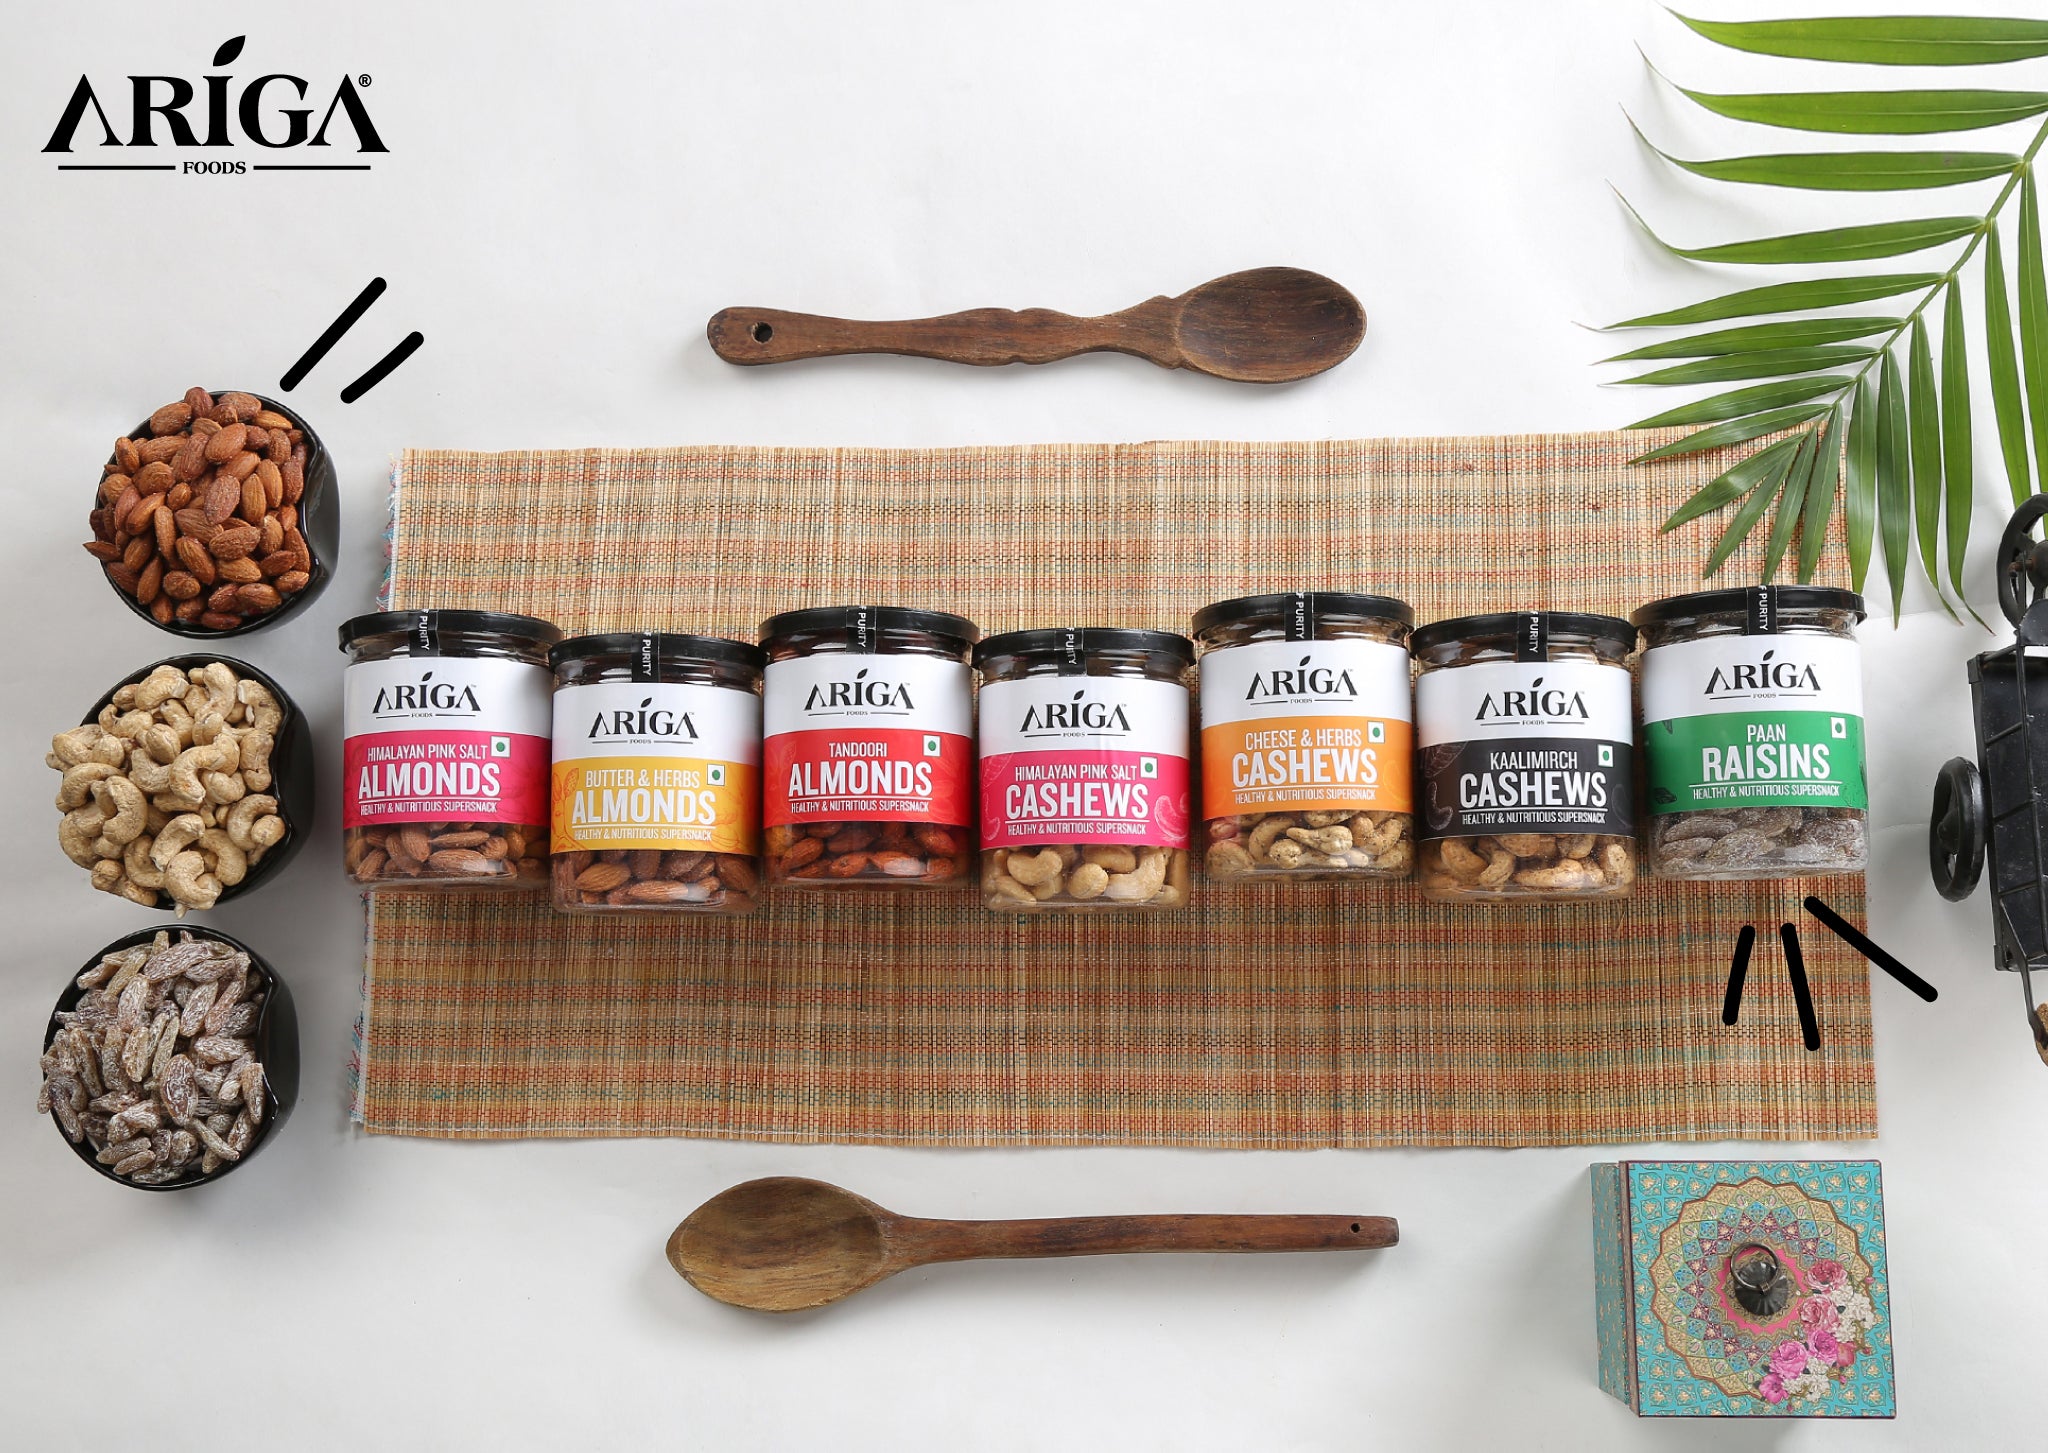 Ariga Food’s Journey to Becoming a Leading Healthy Snack Brand